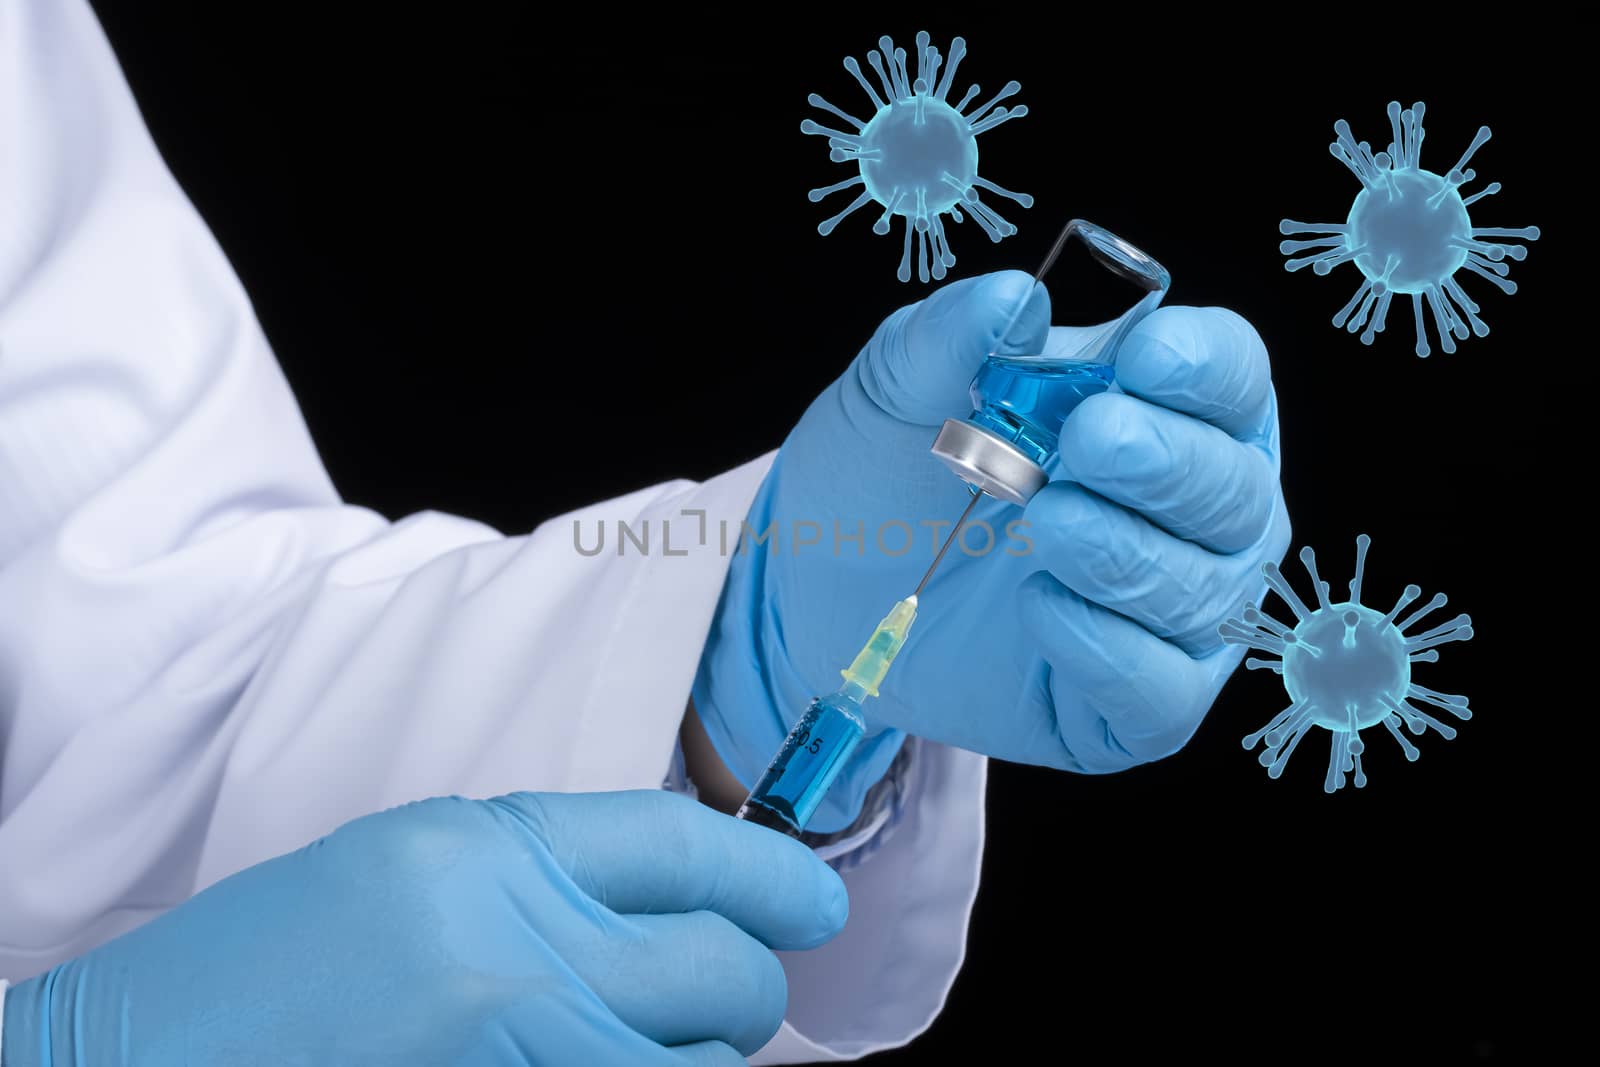 A doctor or a scientist drawing blue liquid from a glass vial. Covid-19 vaccine concept. Dark background with blue corona viruses.